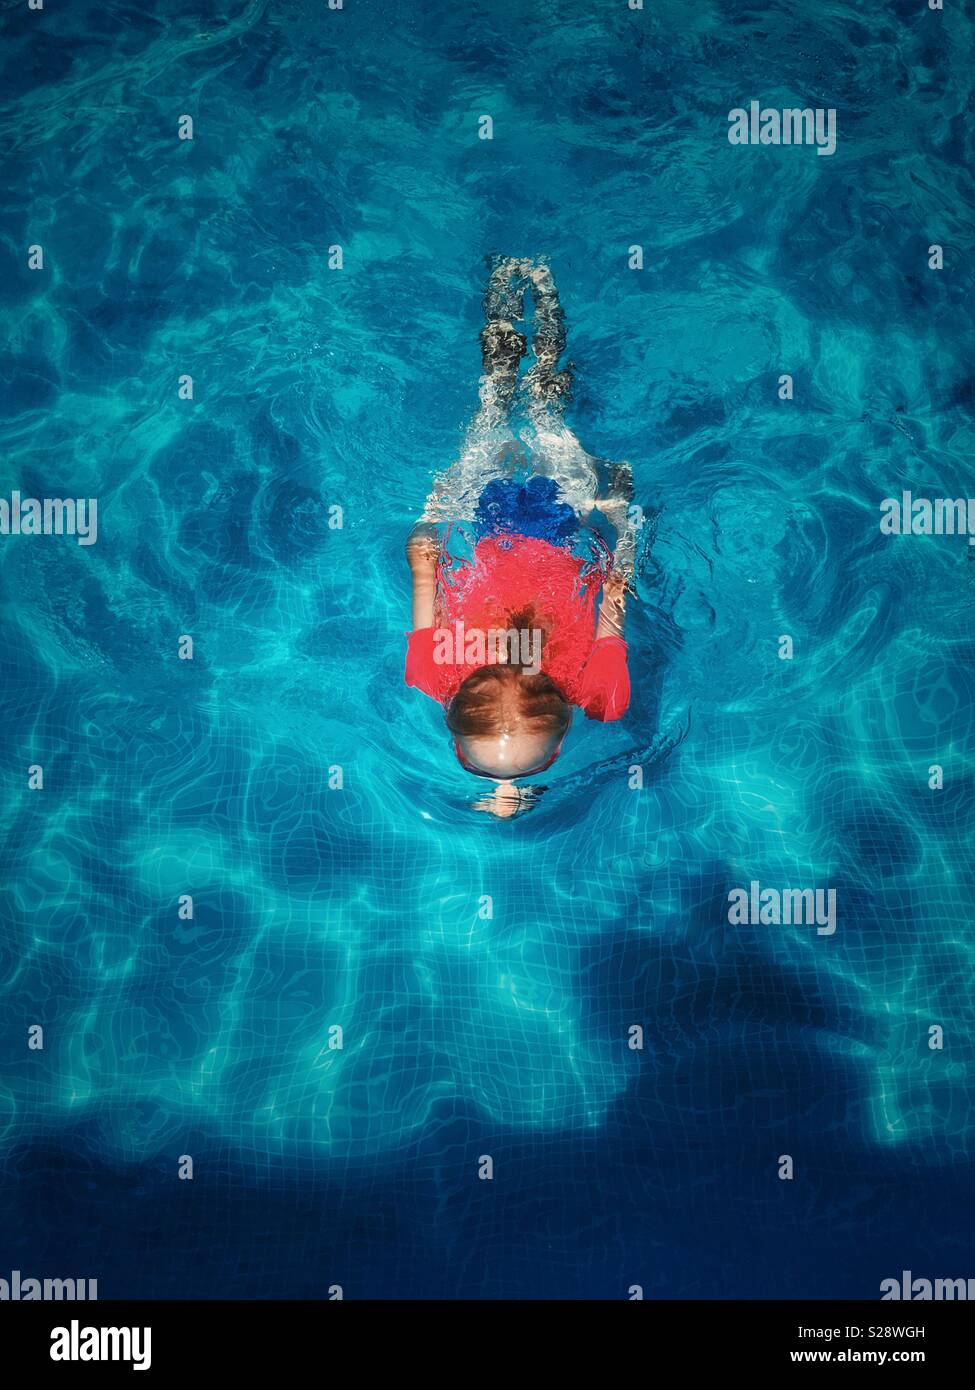 Girl in red top swimming under water in blue swimming pool Stock Photo